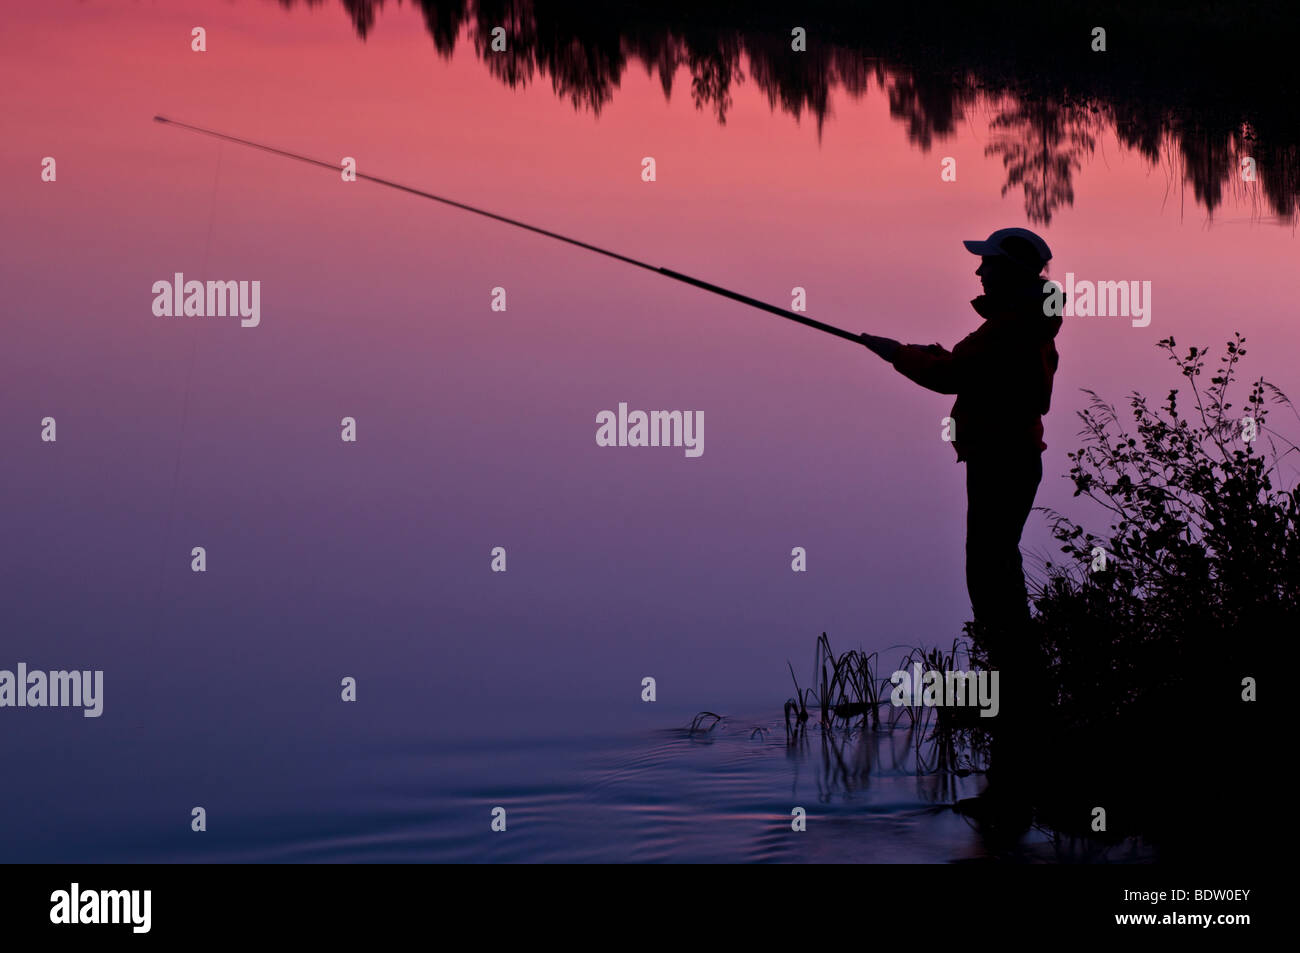 anglerin in abenddaemerung am see in lappland, schweden, female angler at sundwon at lake in swedish lapland Stock Photo